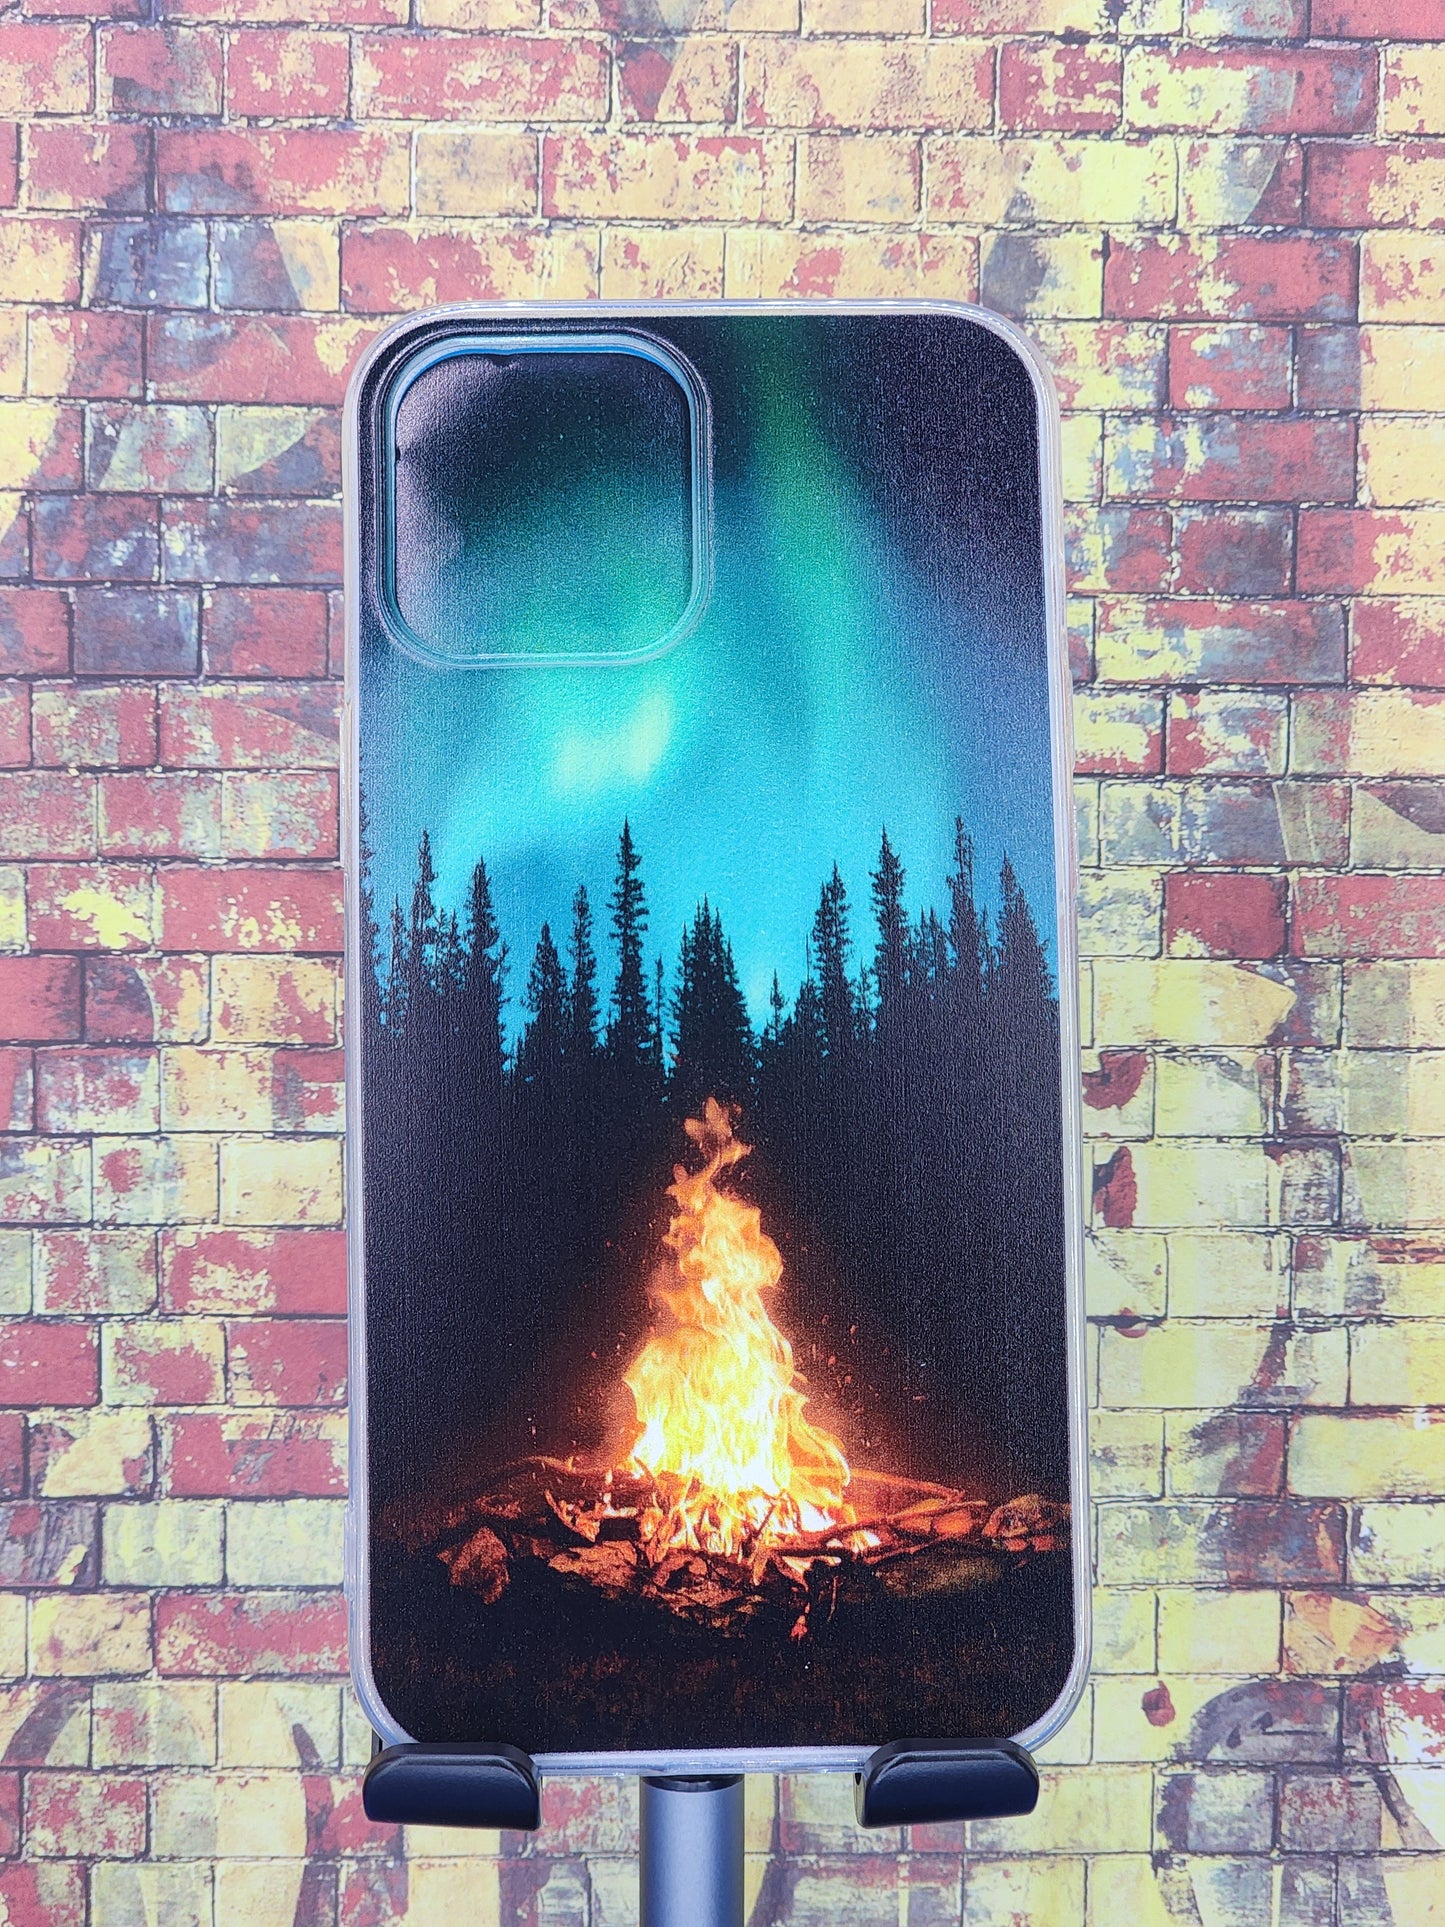 iPhone 12 Pro Max Campfire In The Woods